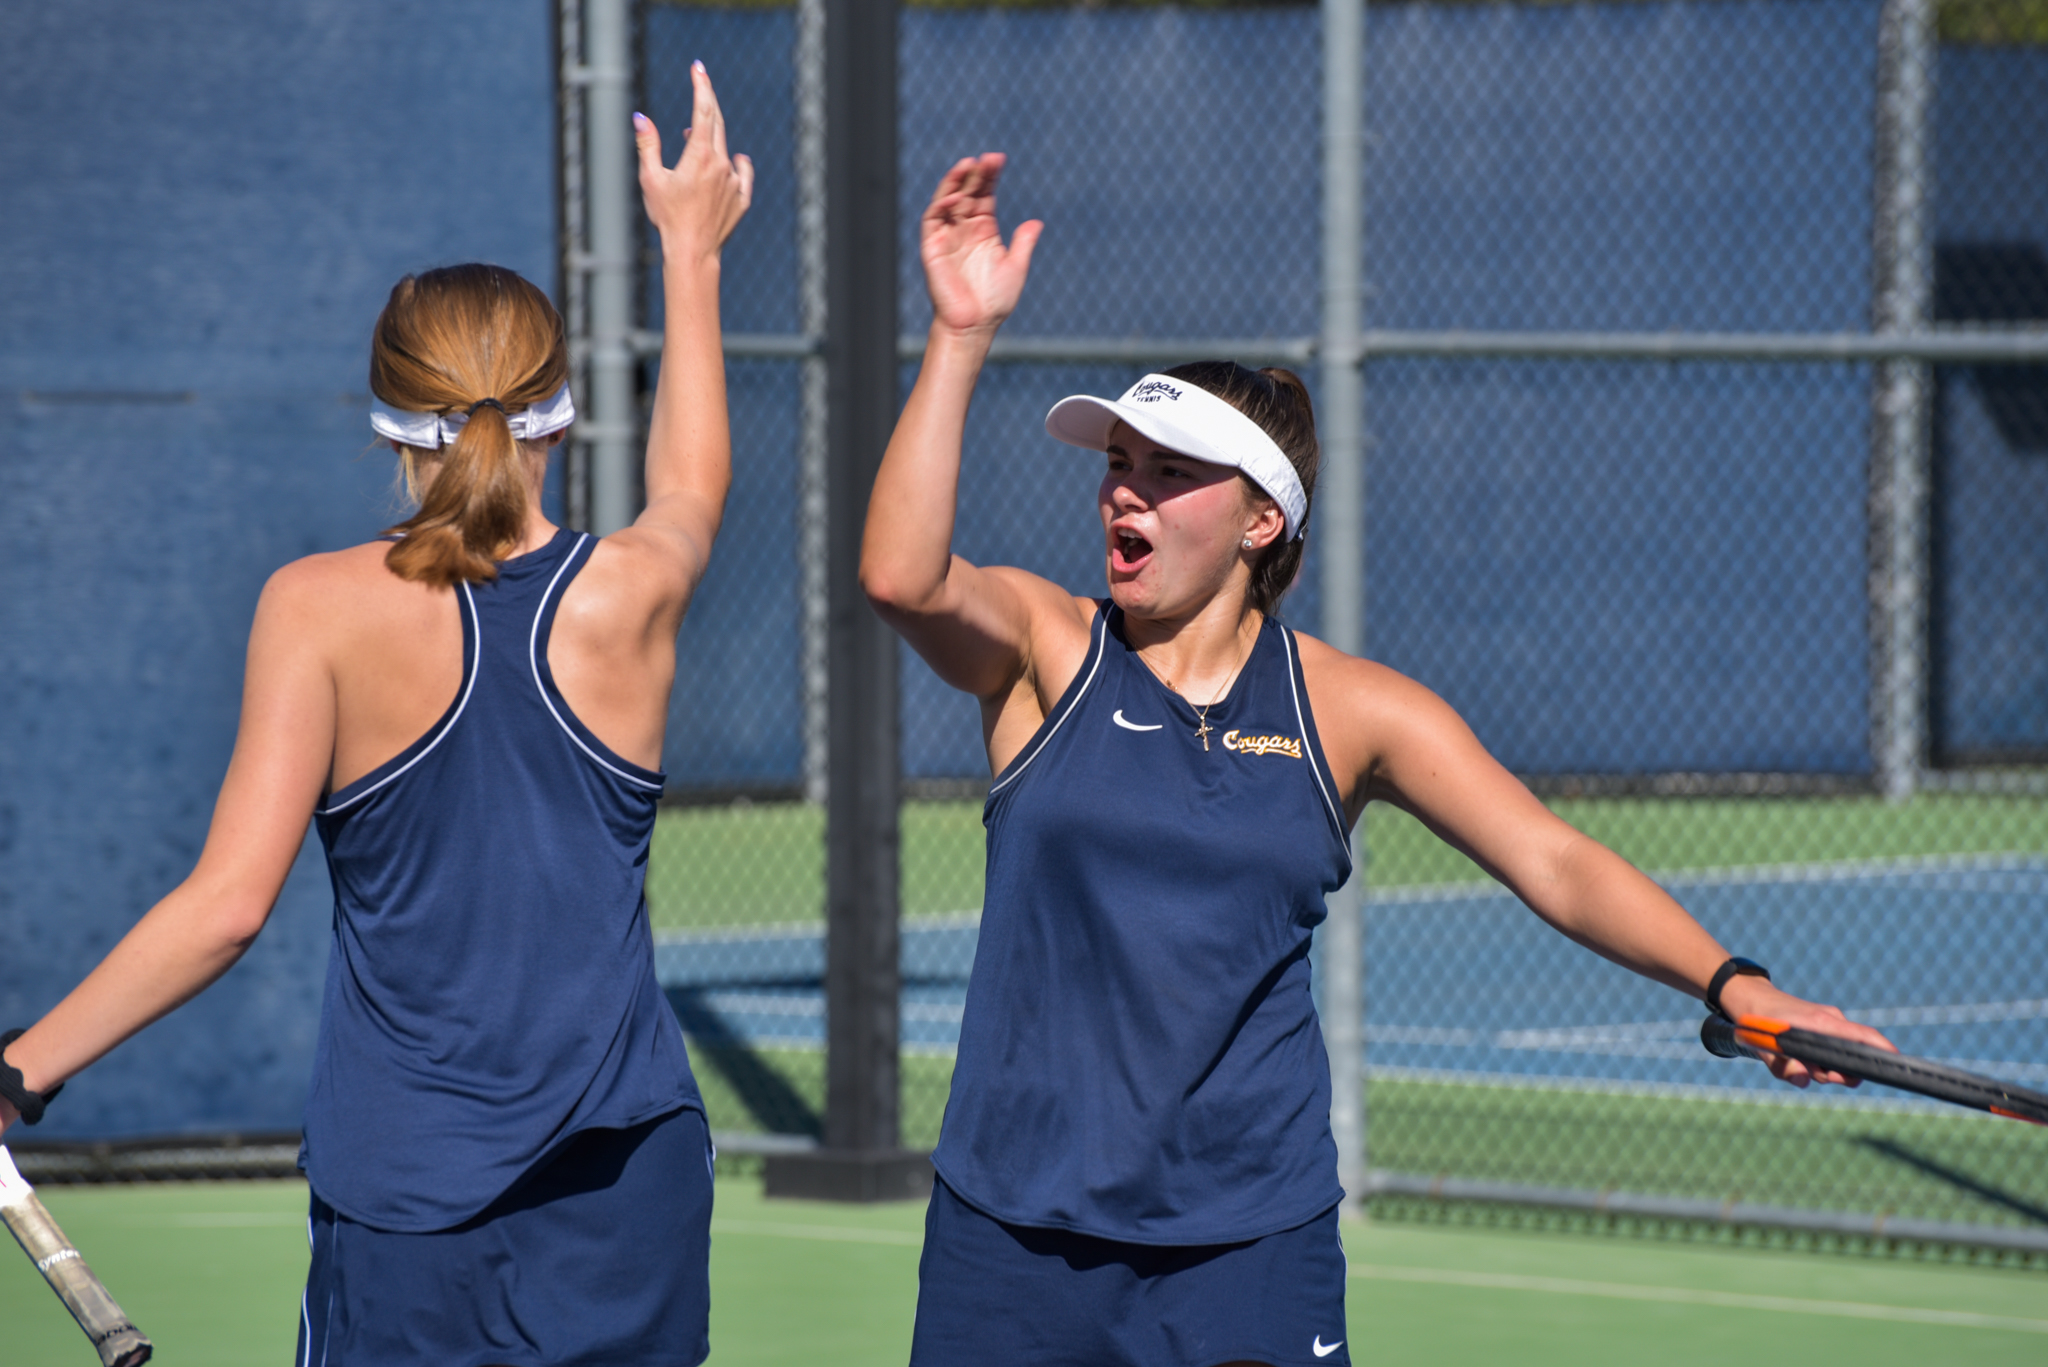 College of the Canyons women's tennis vs. Ventura College on March 8, 2022.